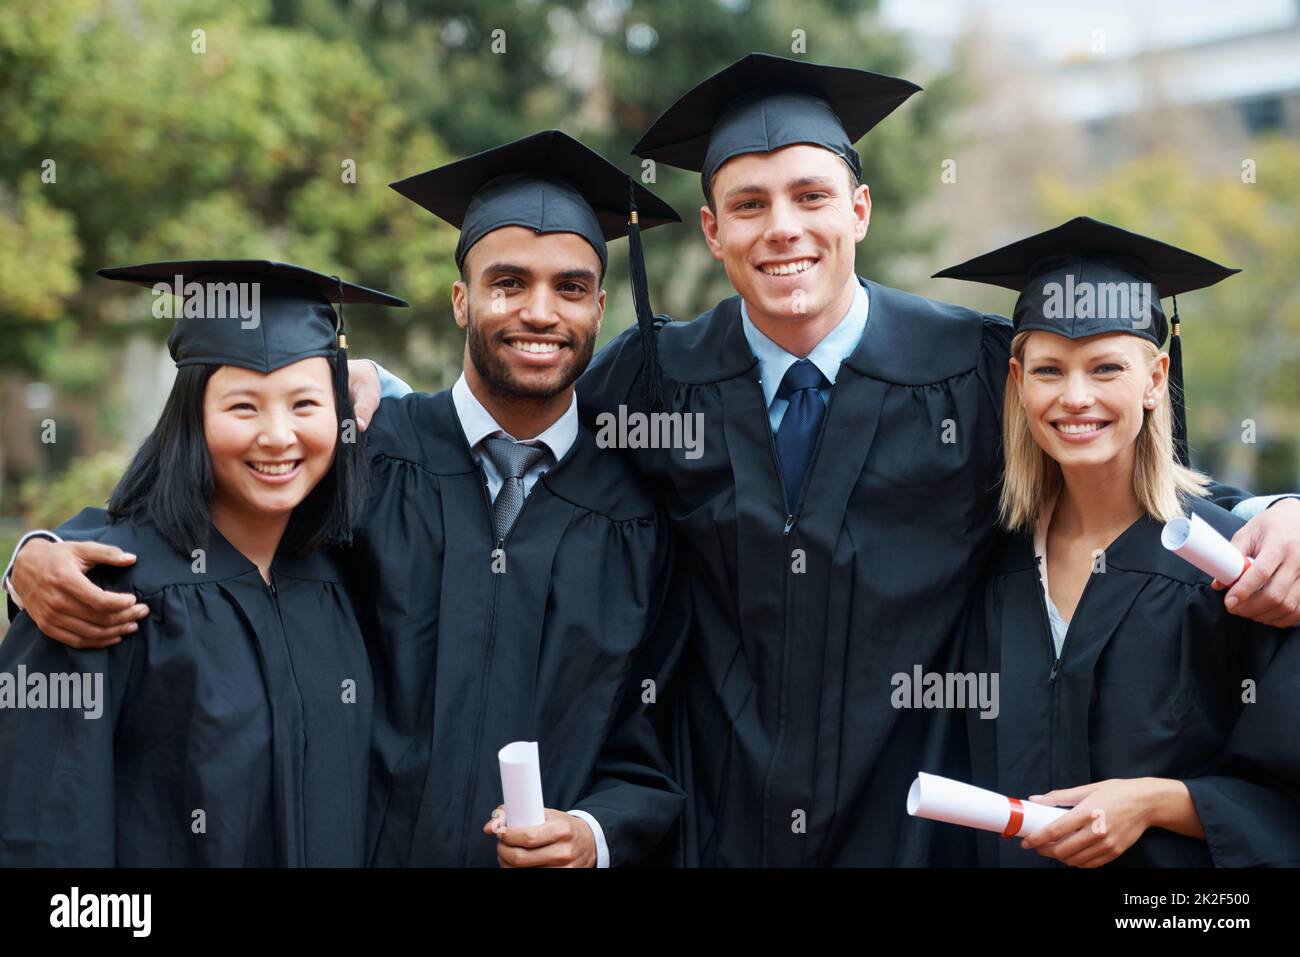 Students and fellow graduates. A group of college graduates standing in cap and gown and holding their diplomas. Stock Photo